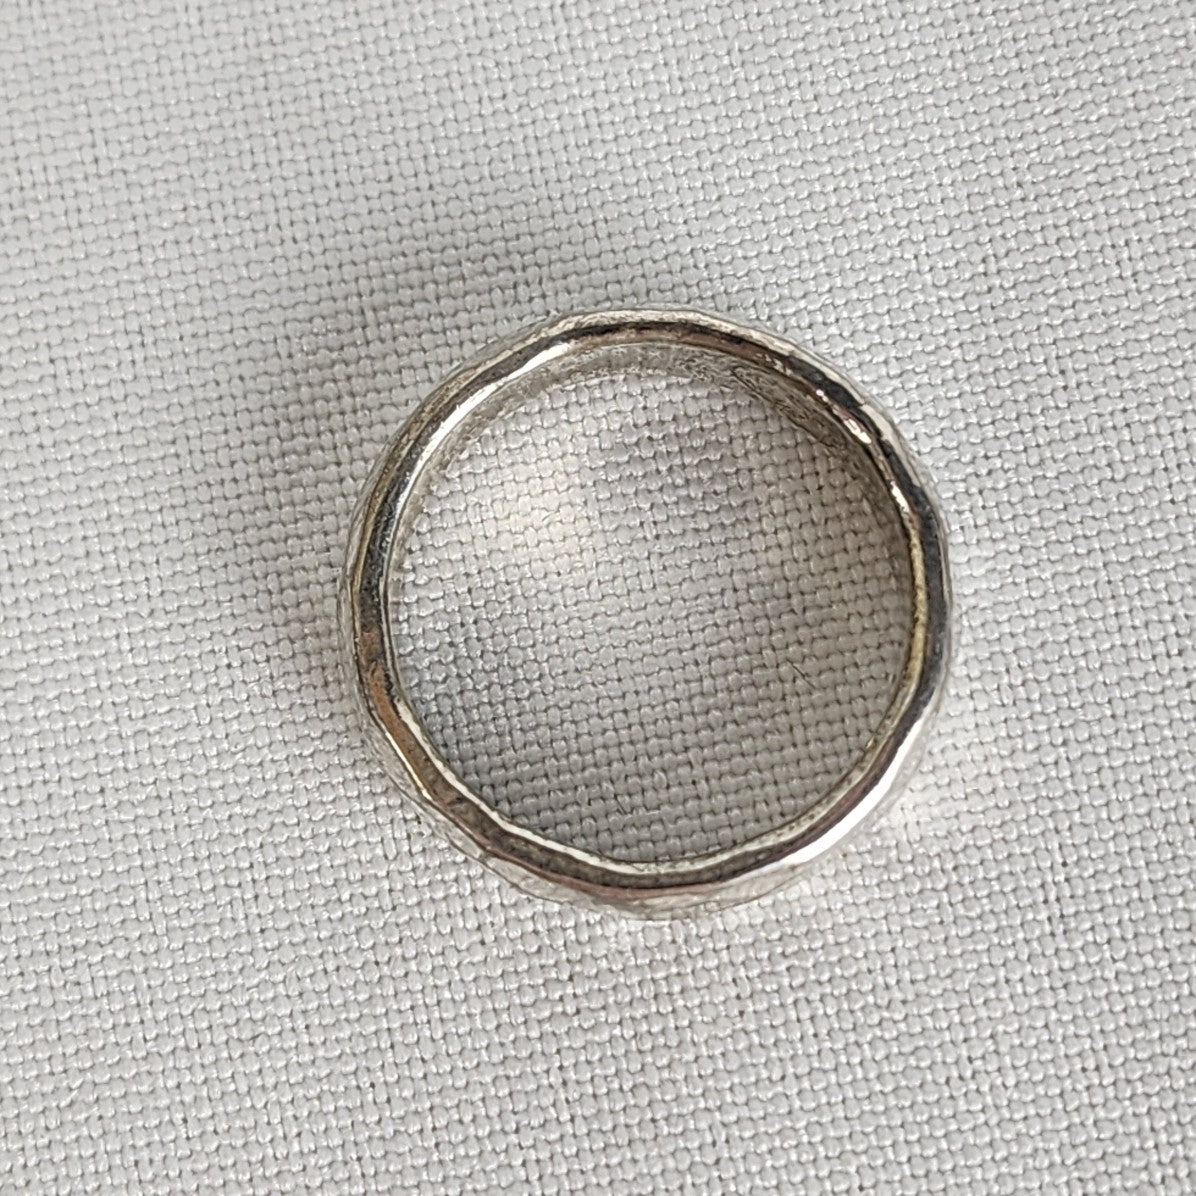 Mex Sterling Silver Hammered Ring Size 7